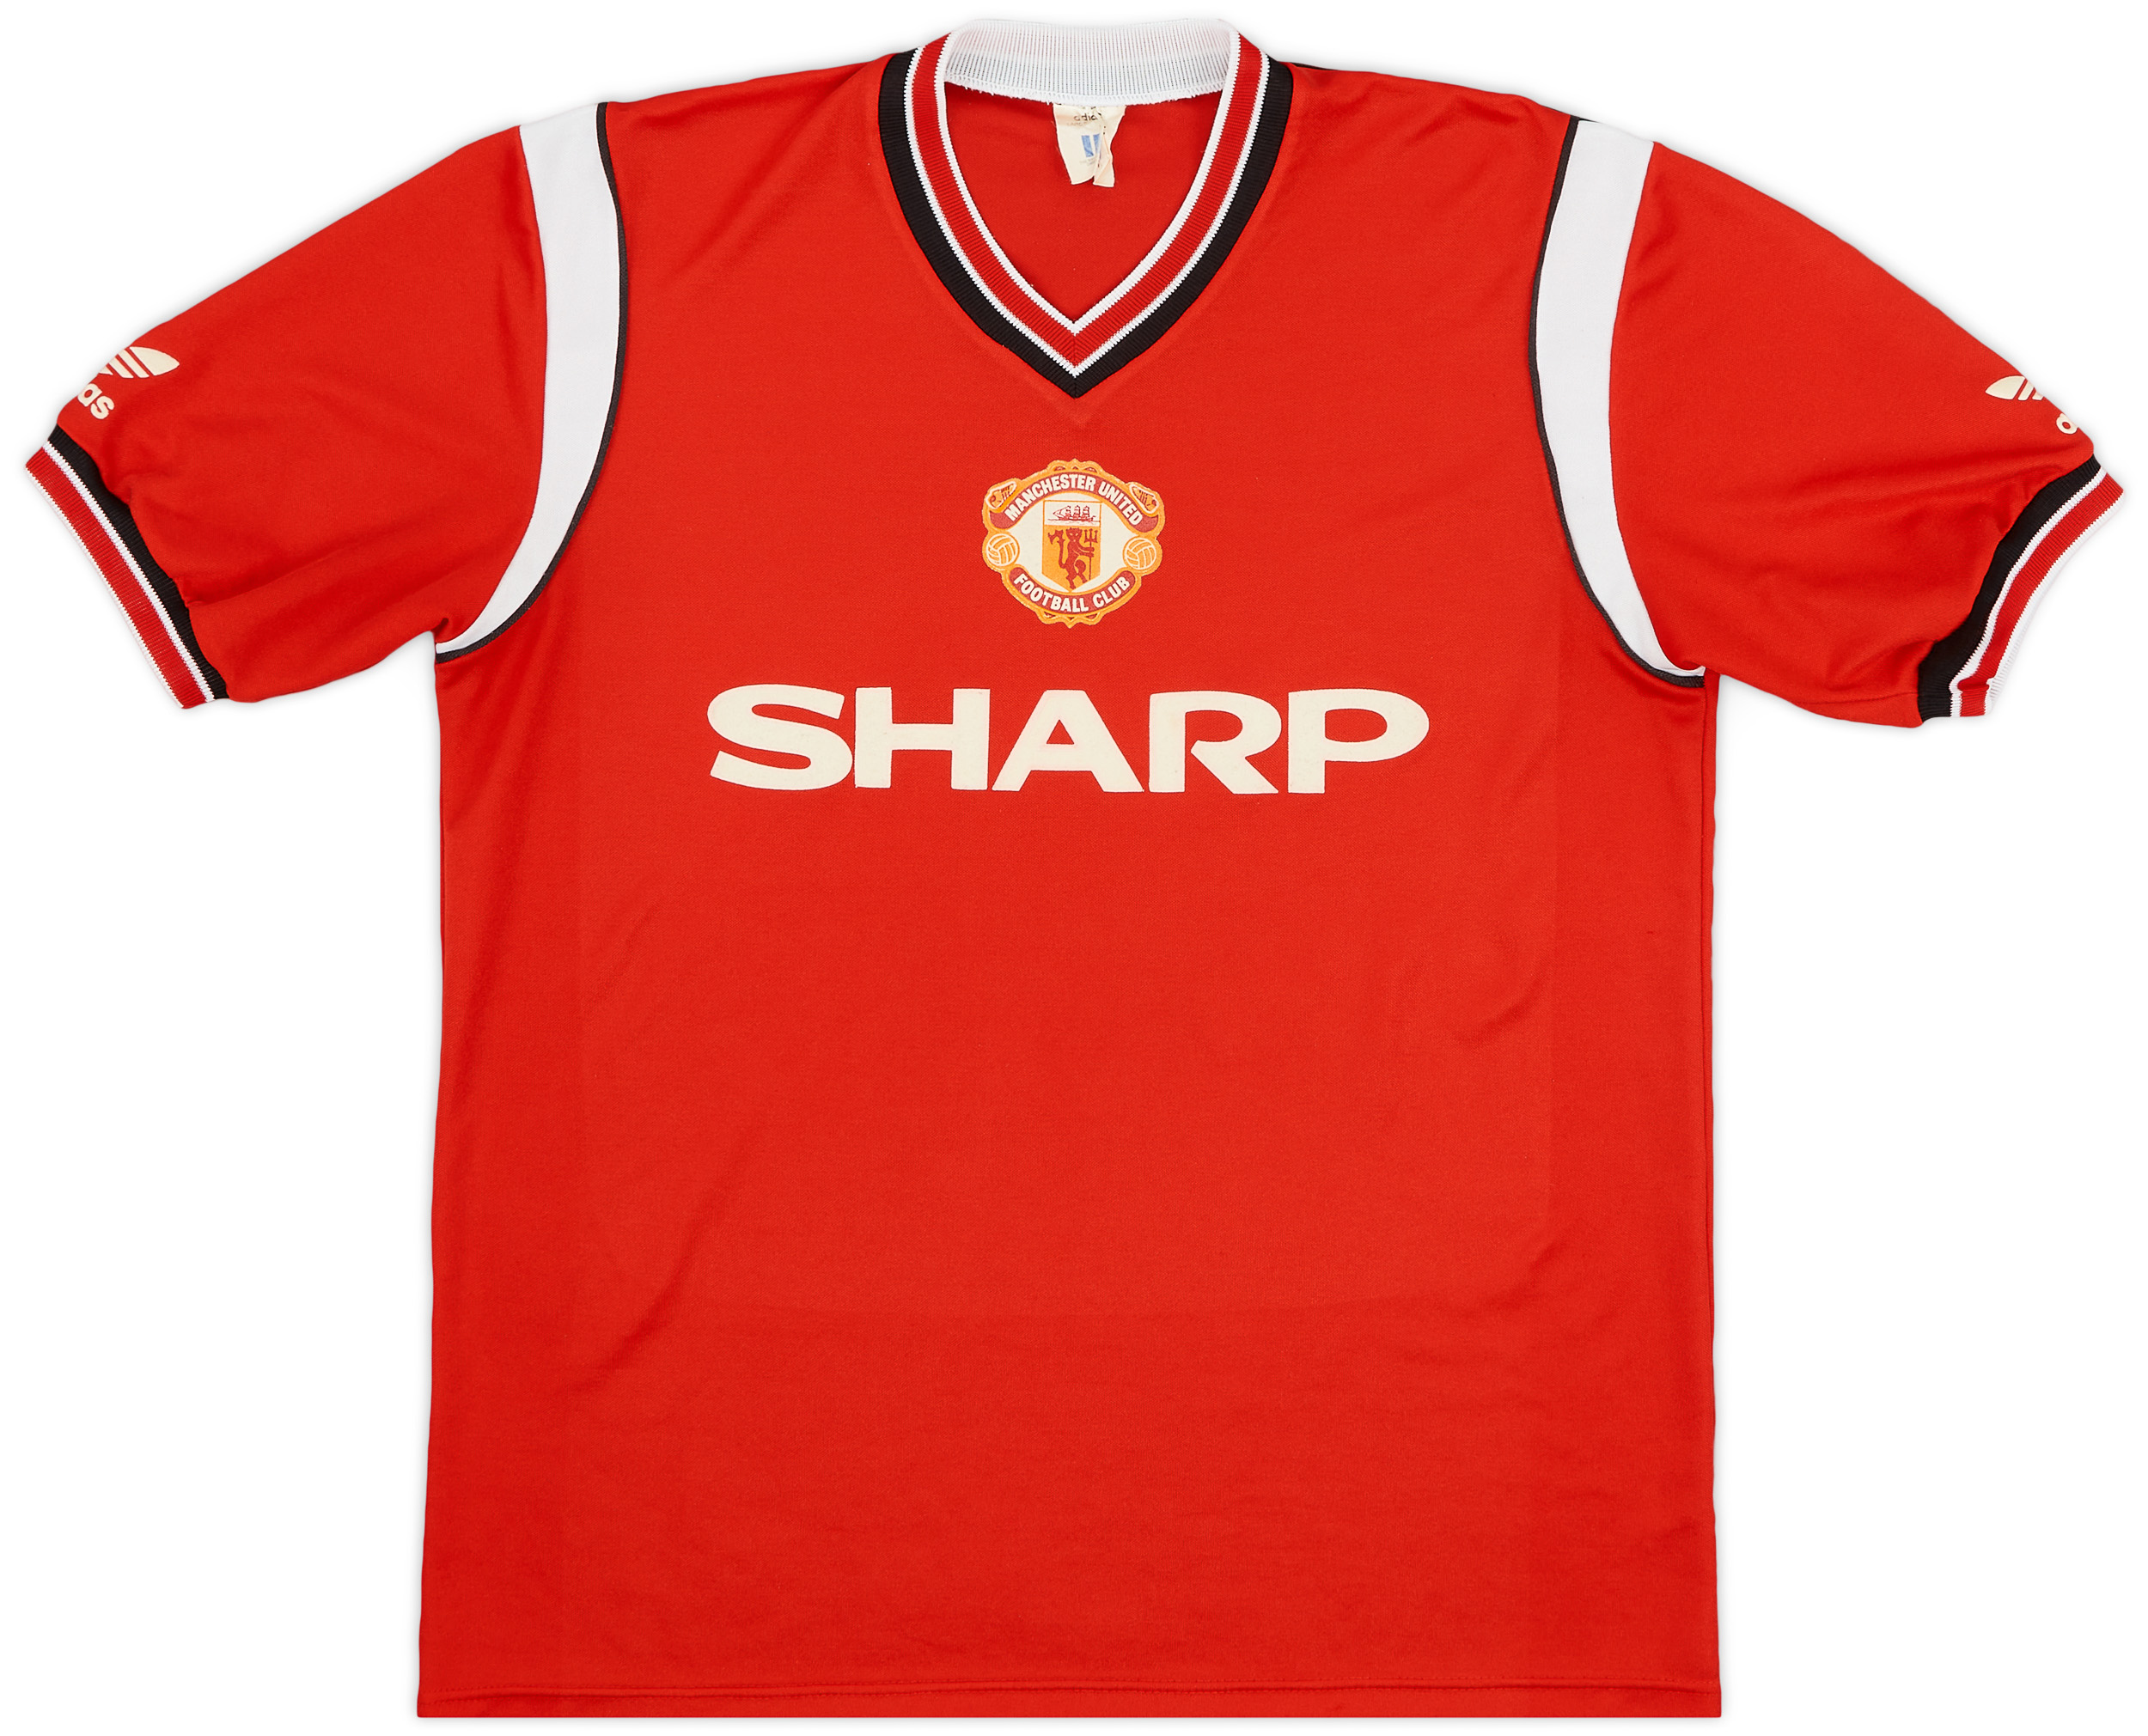 1984-86 Manchester United Home Shirt - 9/10 - ()